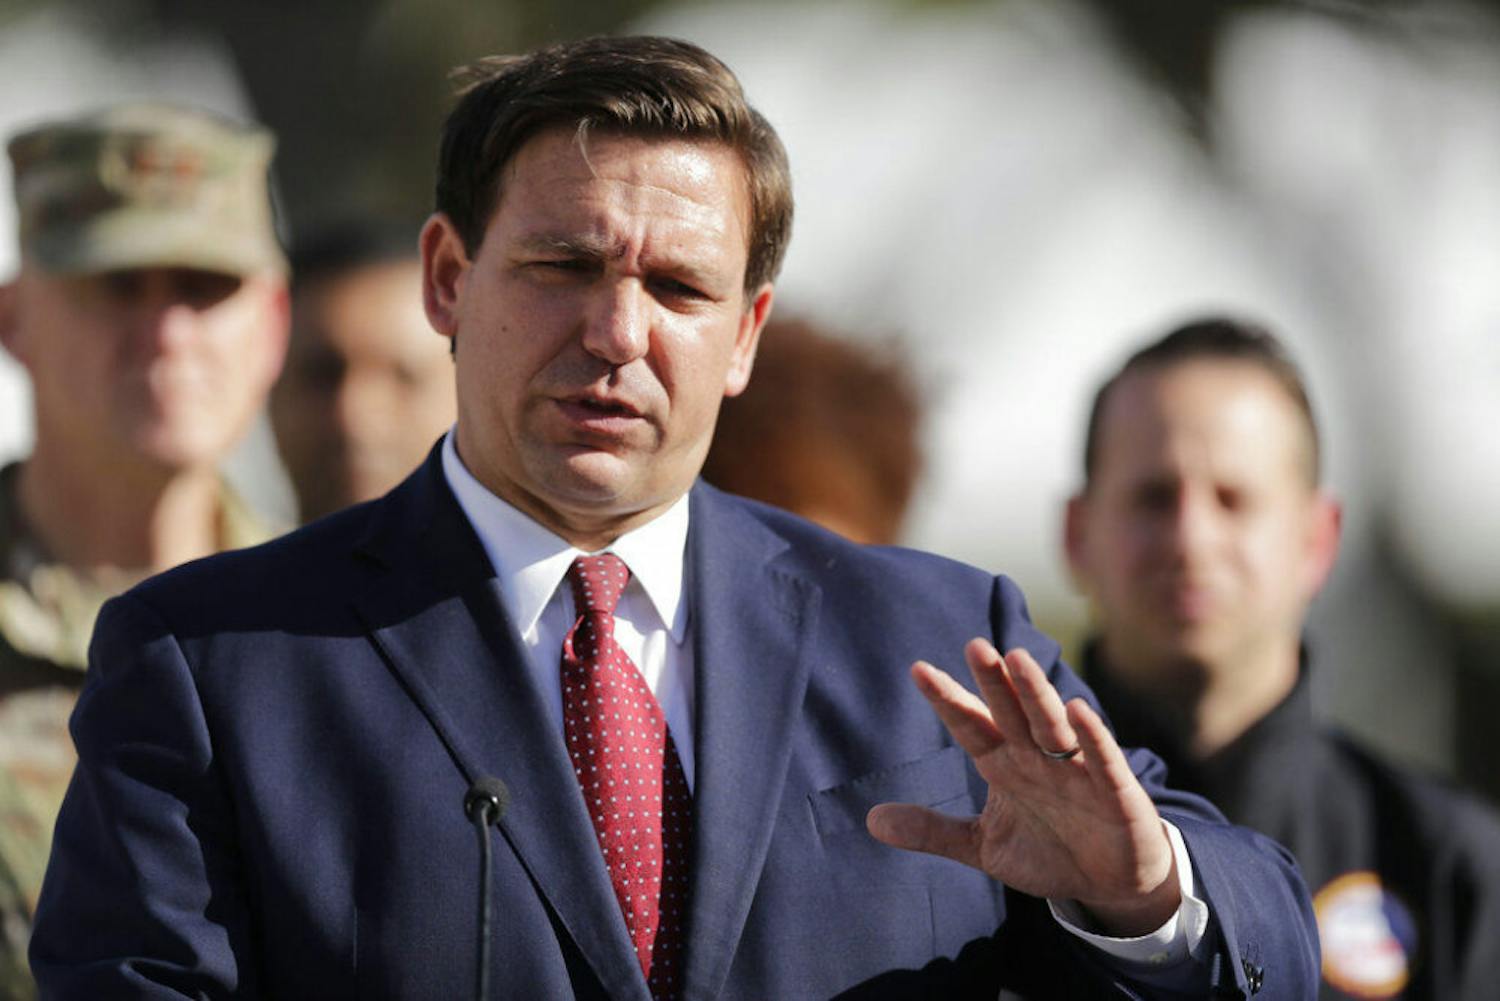 Florida Gov. Ron DeSantis speaks during a news conference at C.B. Smith Park, Thursday, March 19, 2020, in Pembroke Pines, Fla. The park will be used for a drive thru COVID-19 testing facility. (AP Photo/Brynn Anderson)